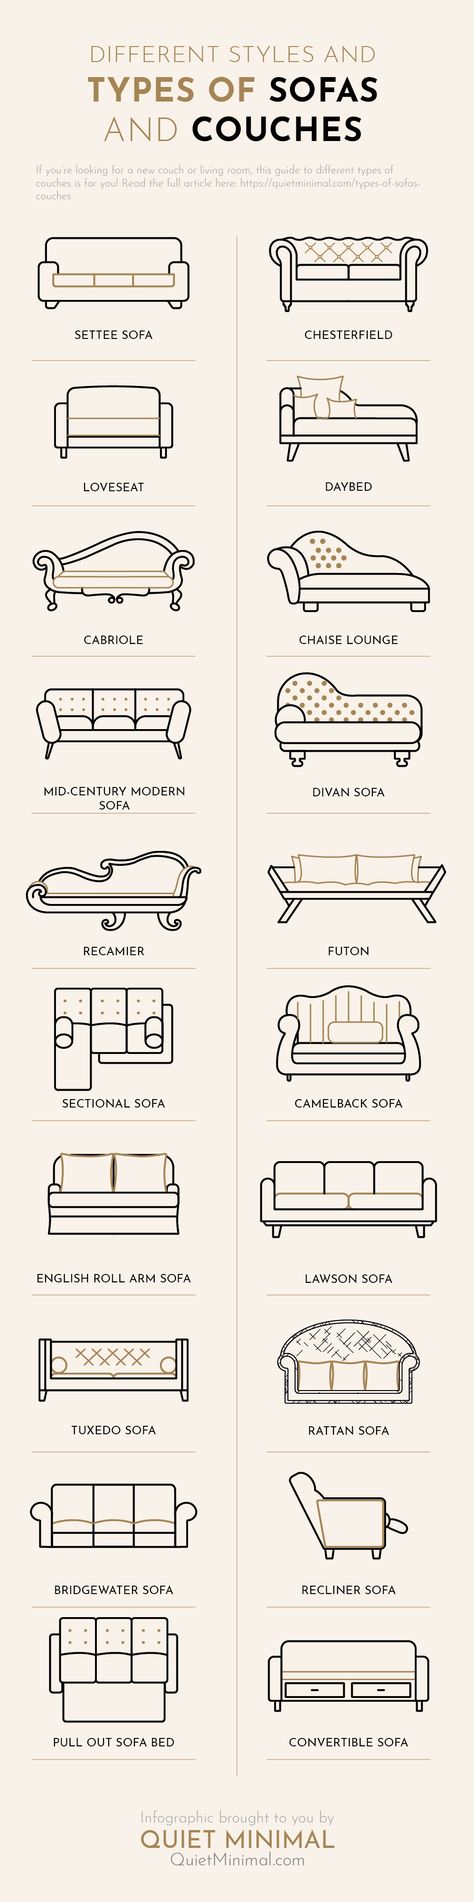 20 Different Types of Couches & Styles of Sofas for Your Home - Quiet Minimal - Interior Design Inspiration & Ideas Bedroom Types Interior Design, Different Types Of Sofas, Couch For Bedroom Ideas, Basic Interior Design Sketches, Bedroom Couch Design, Basics Of Interior Design, Different Types Of Interior Styles, Types Of Sofas Furniture, Types Of Sofas Couch